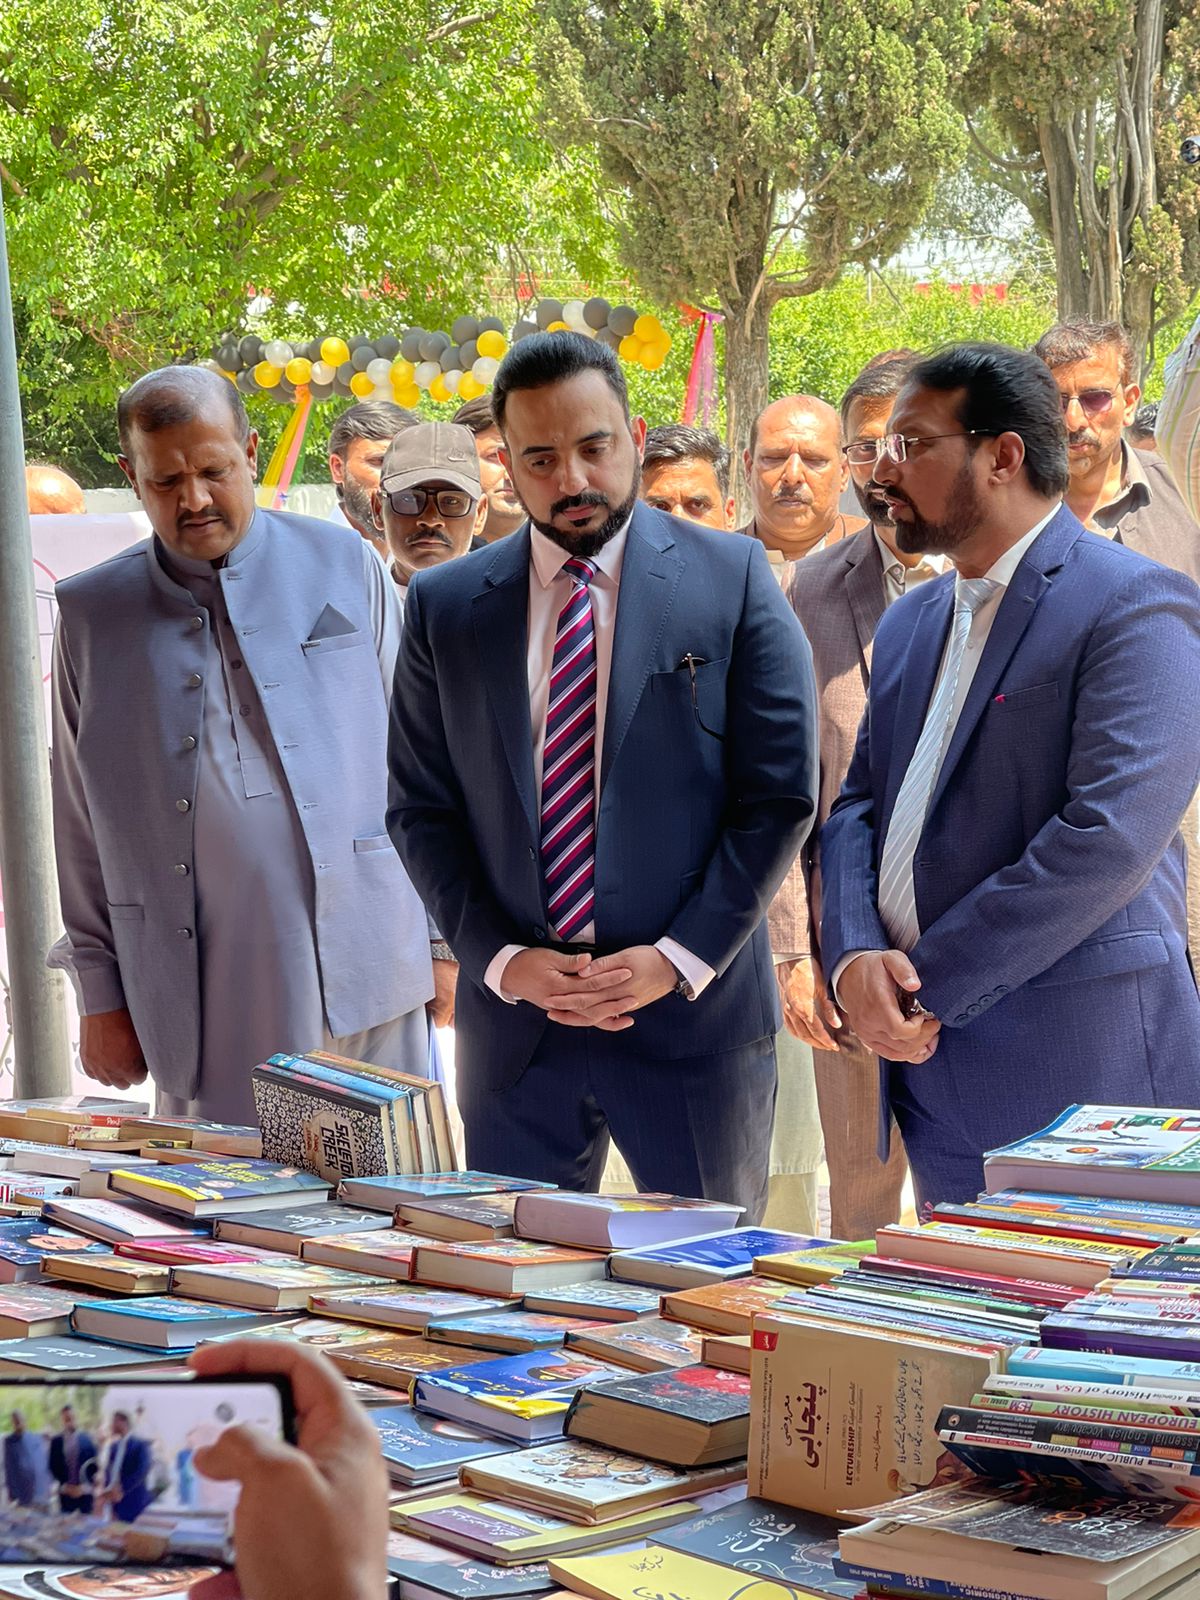 ICT admin hosts three-day book fair to encourage reading